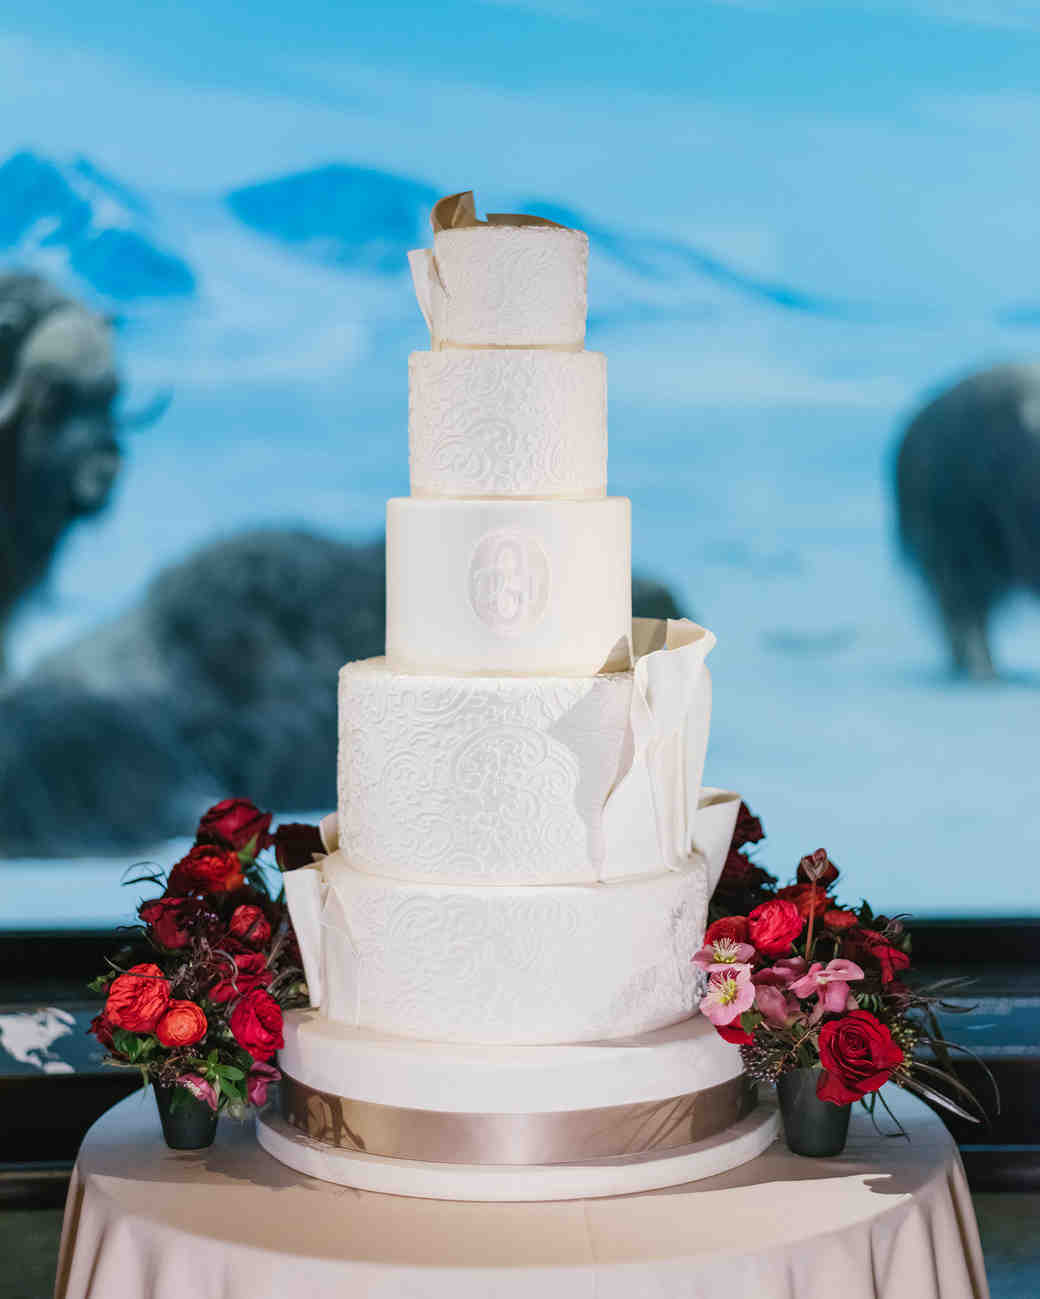 Exclusive See "Ace of Cakes" Star Duff Goldman's Wedding